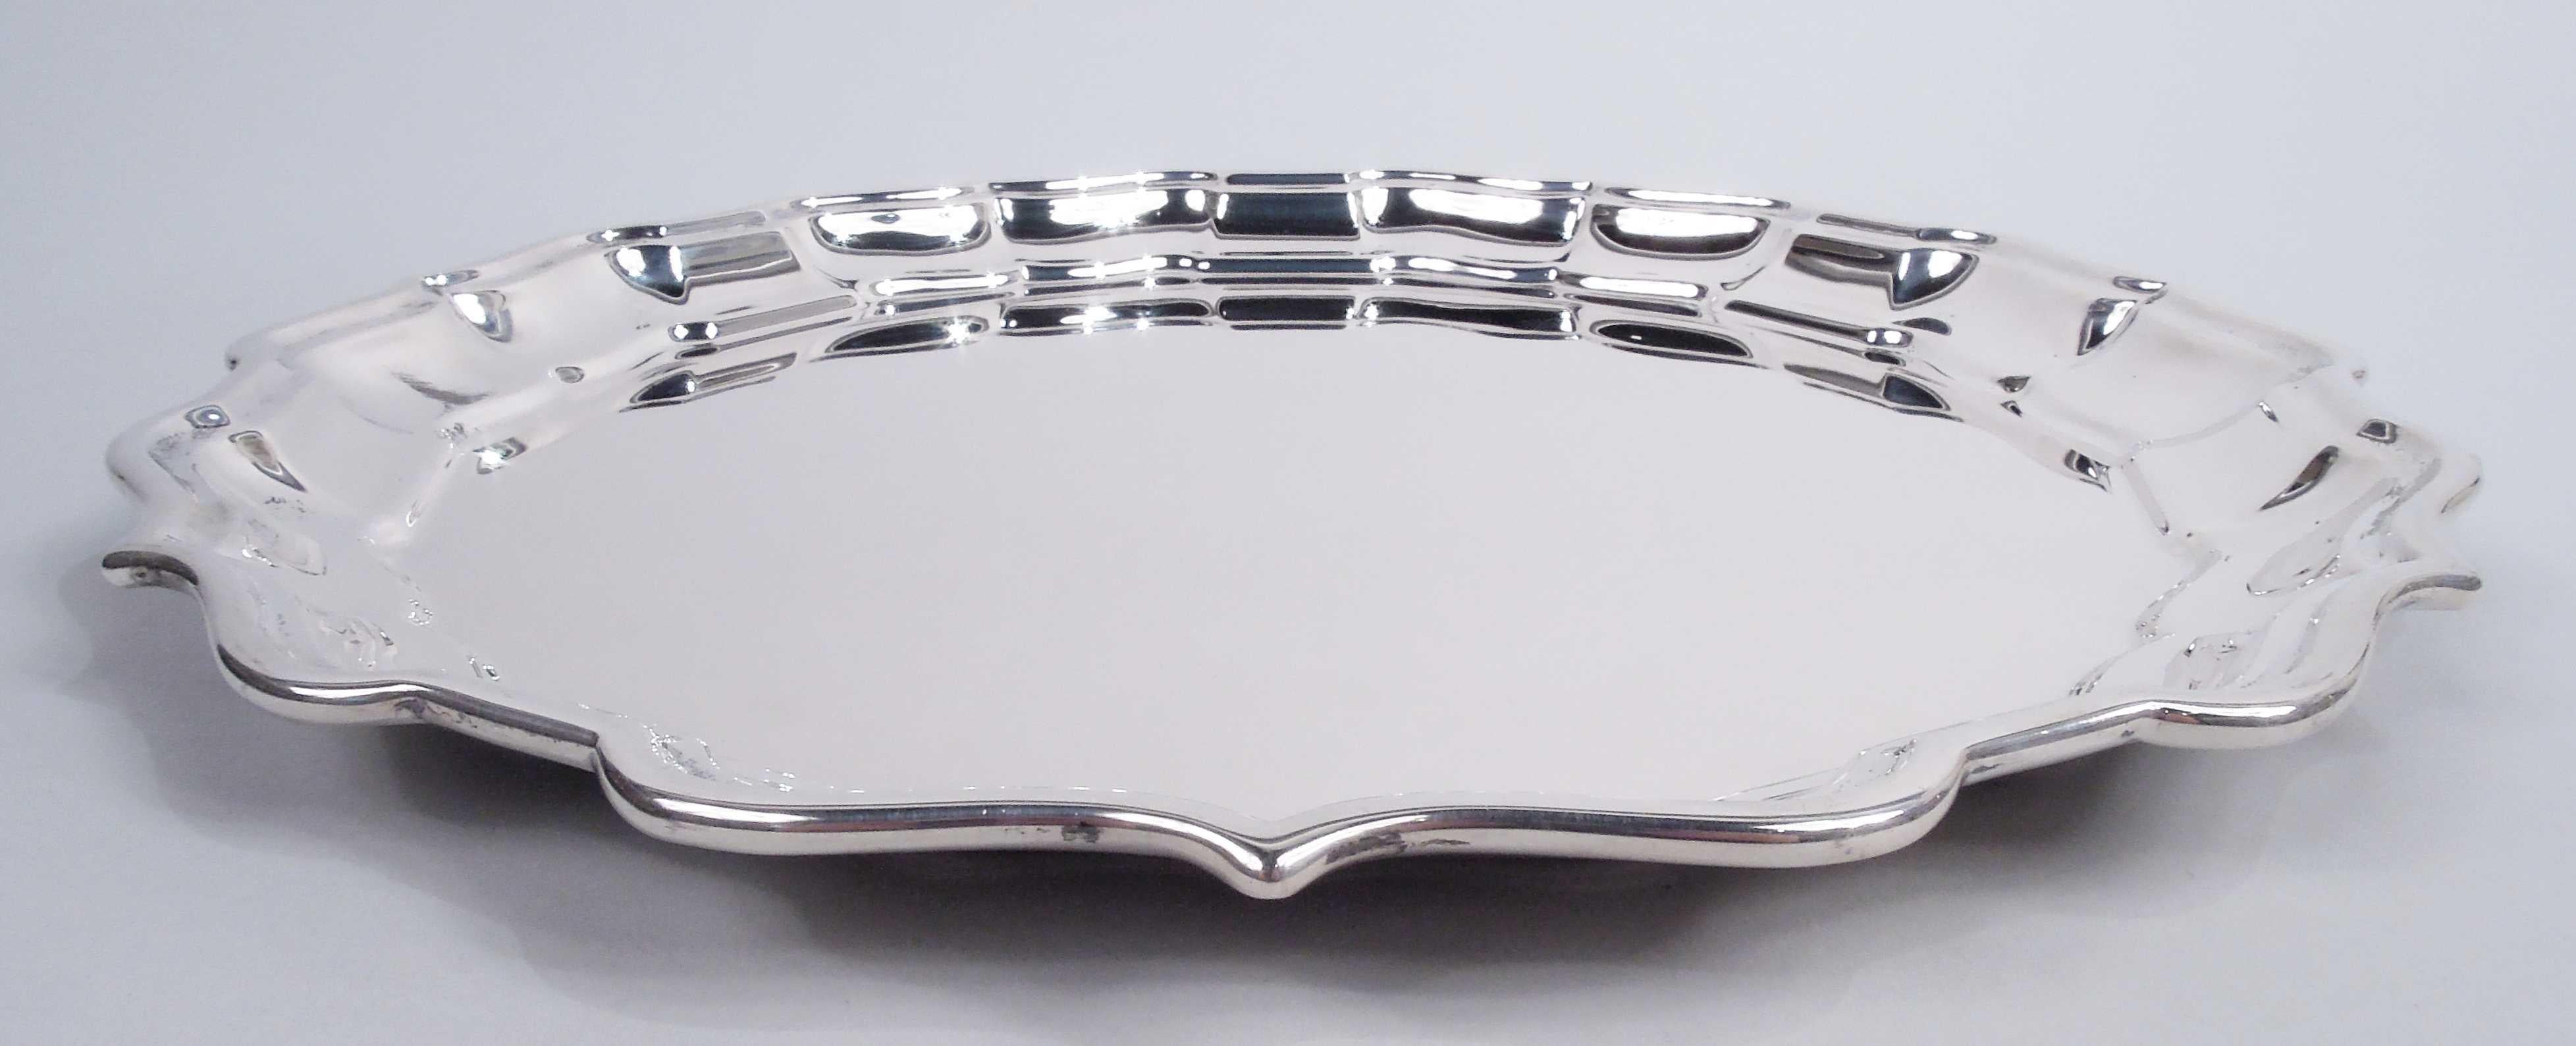 Chippendale sterling silver tray. Georgian-style sterling silver serving tray. Made by Frank Smith in Gardner, Mass. Round with molded curvilinear ogee piecrust rim. Traditional Georgian in the aptly names pattern. Fully marked including maker’s